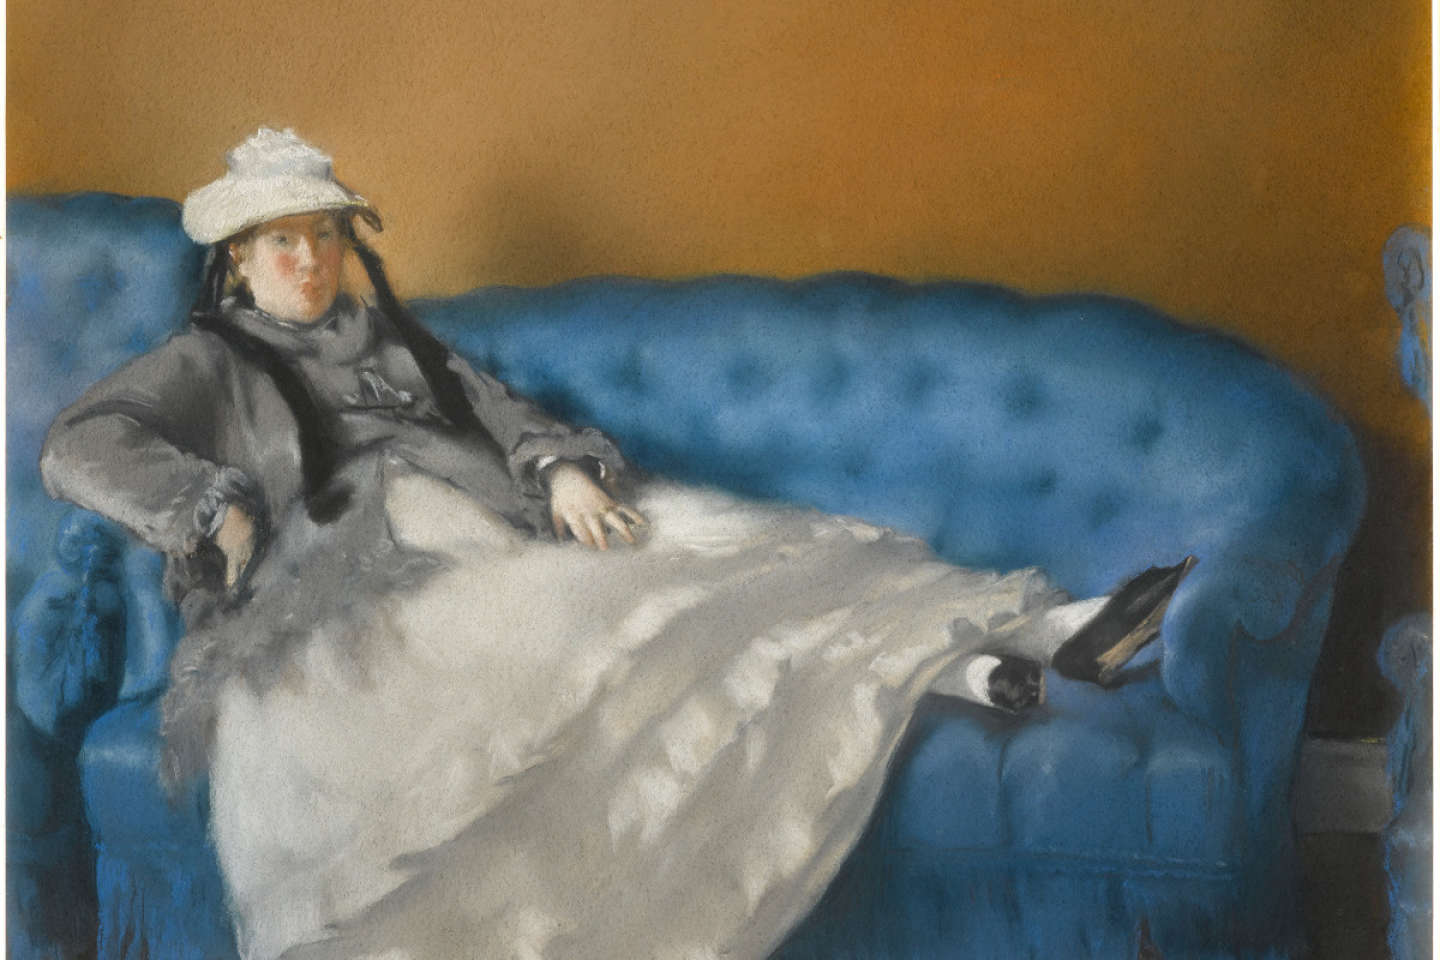 At the Musée d’Orsay, Degas and Manet reunited in a fruitful friendly and artistic match